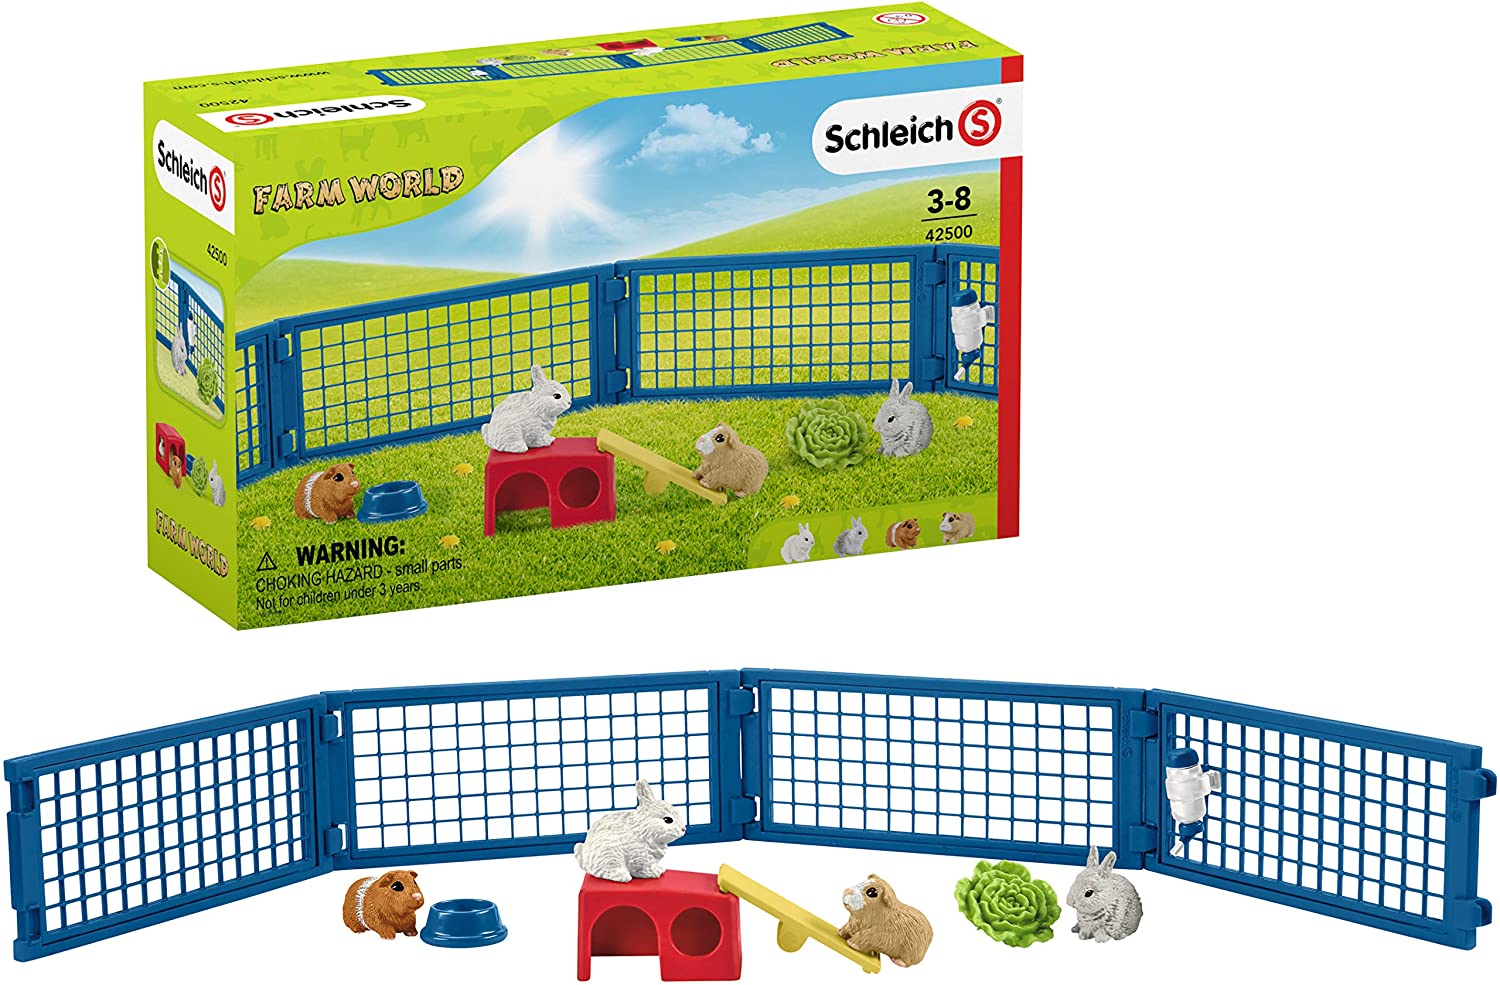 Schleich 42500 Farm World Play Set - Home For Rabbits And Guinea Pigs Toy F